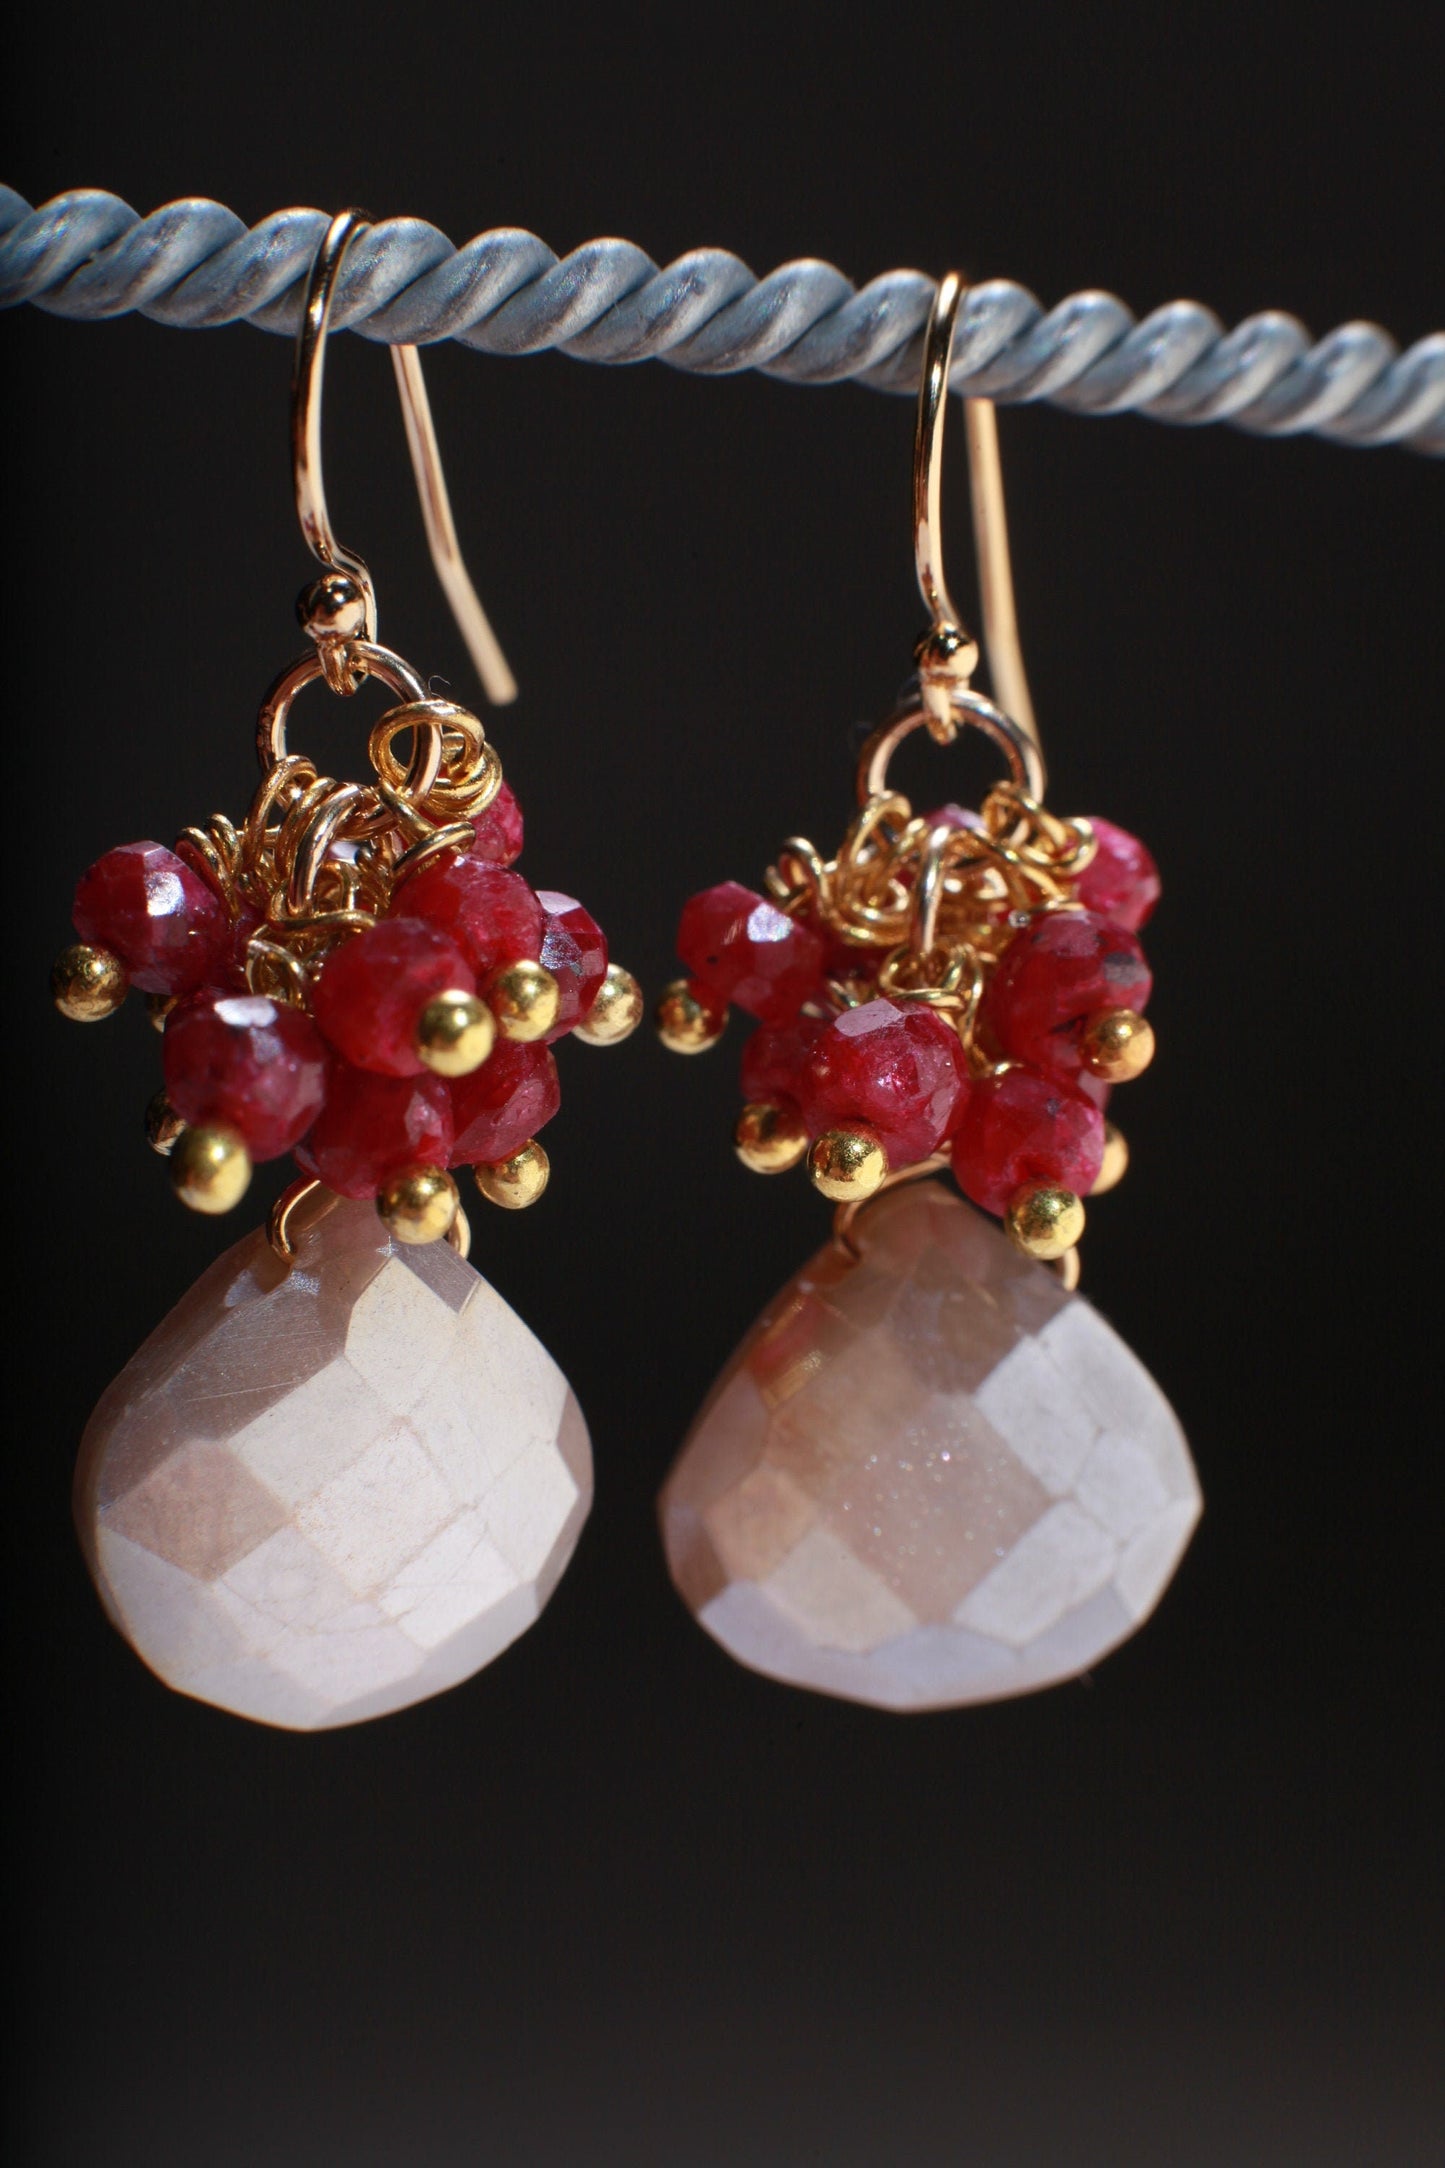 Genuine Ruby Cluster Wire Wrapped, Peach Moonstone Dangling Earrings in 14K Gold Filled Ear Wire, Valentine, Bridesmaid, Gift for her